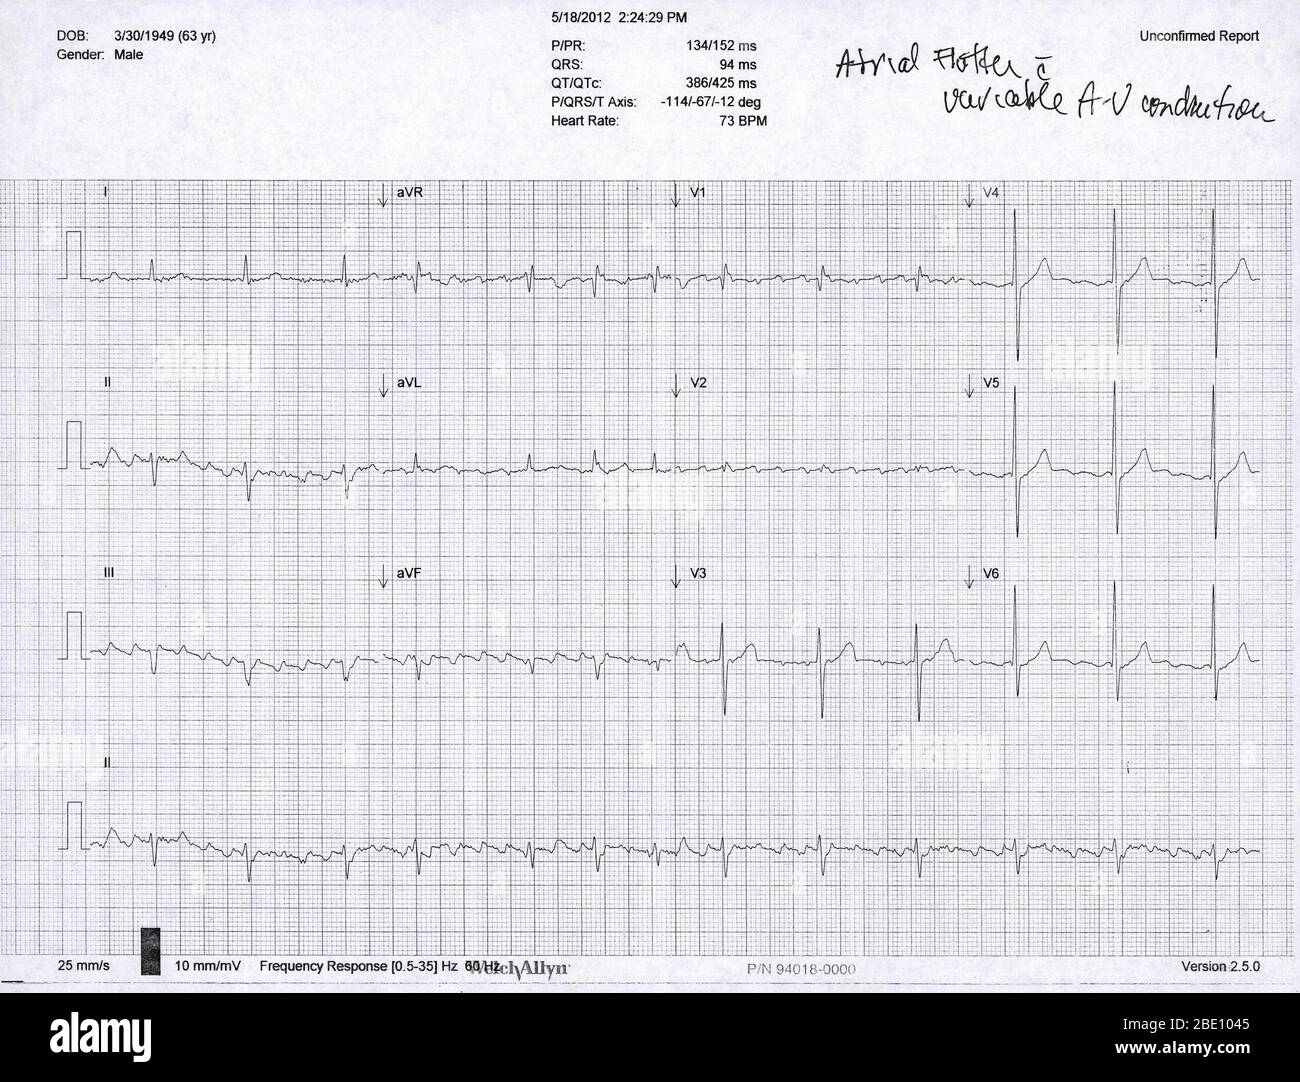 Electrocardiogram (ECG) of a 63 year old male showing atrial flutter and atrioventricular (AV) conduction. An ECG measures the pumping of the heart chambers using 12 external electrodes (I-III, V1-V6 and aVR, aVL and aVF), recording it as electrical waves. A flutter is an increased rate of contraction of the upper heart chambers (atria), seen as numerous shallow waves Stock Photo